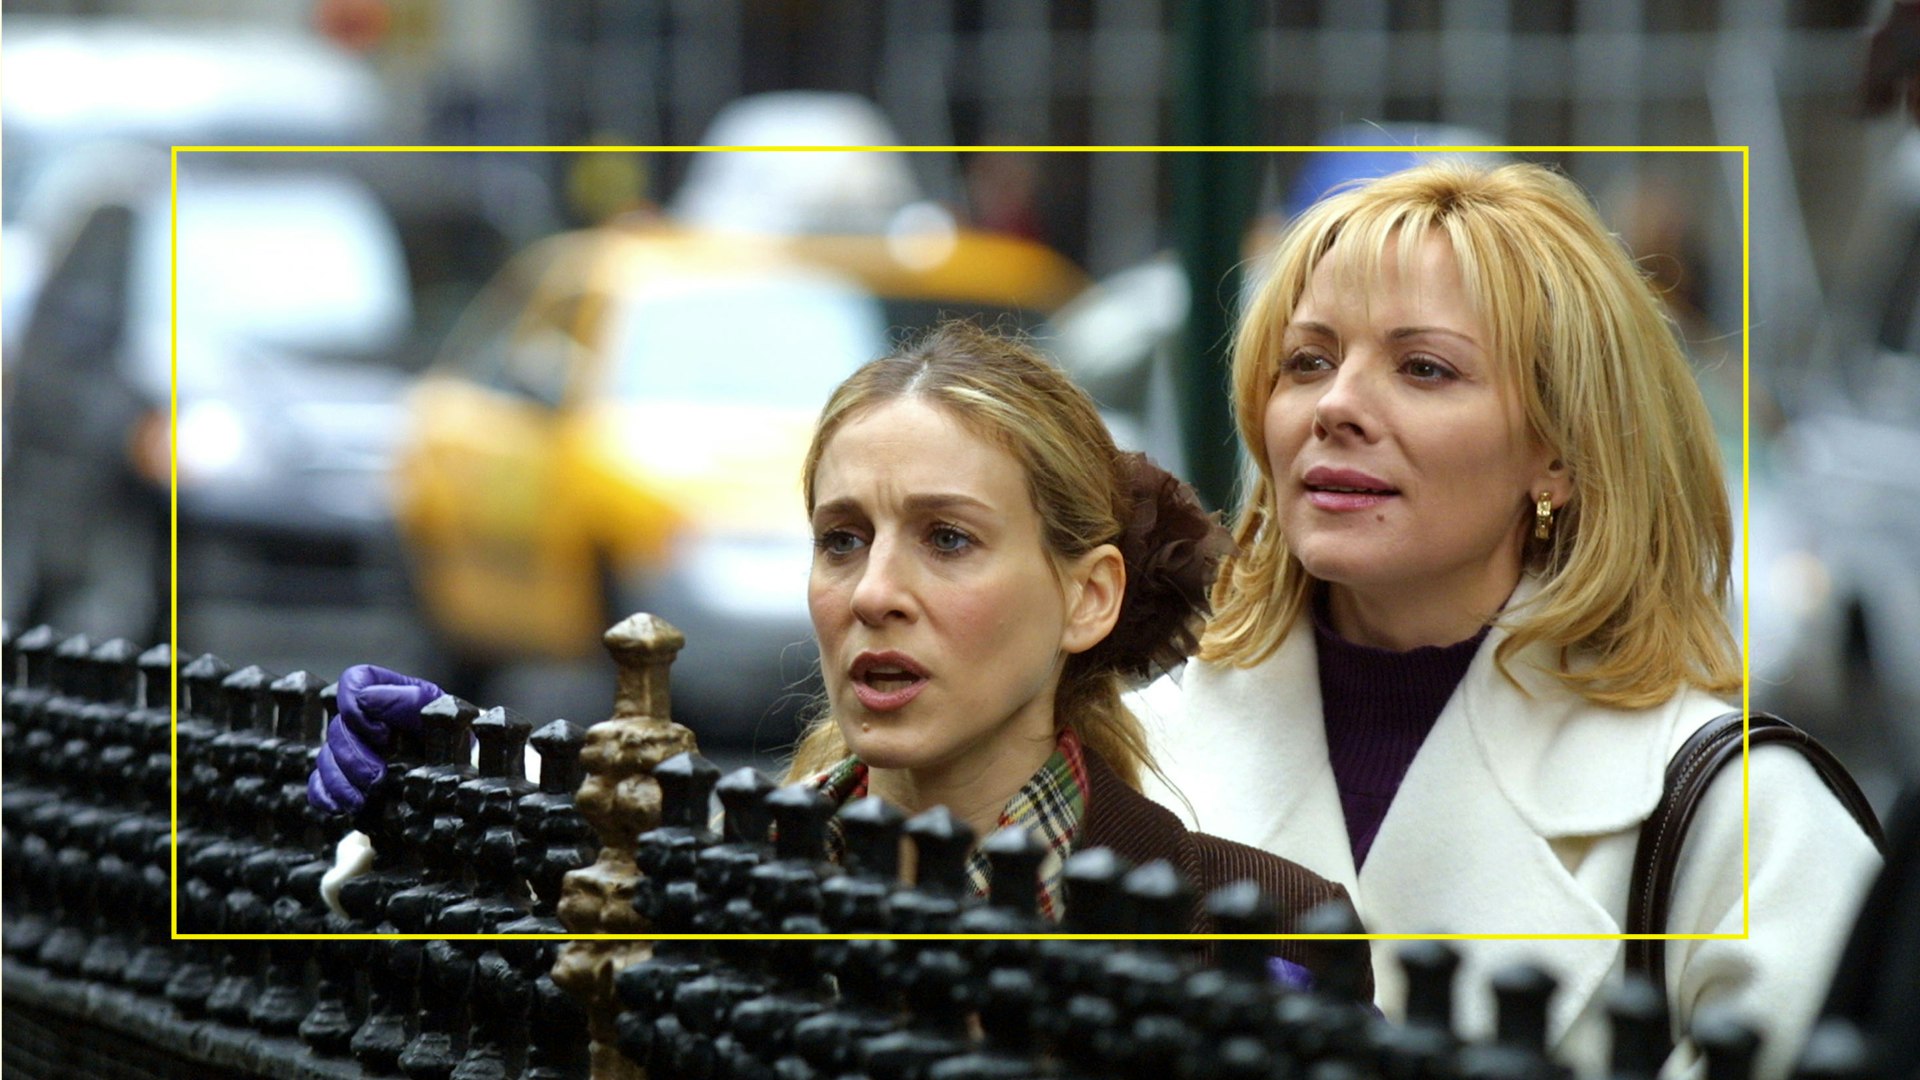 Here's The Story Behind Kim Cattrall And Sarah Jessica Parker's Feud